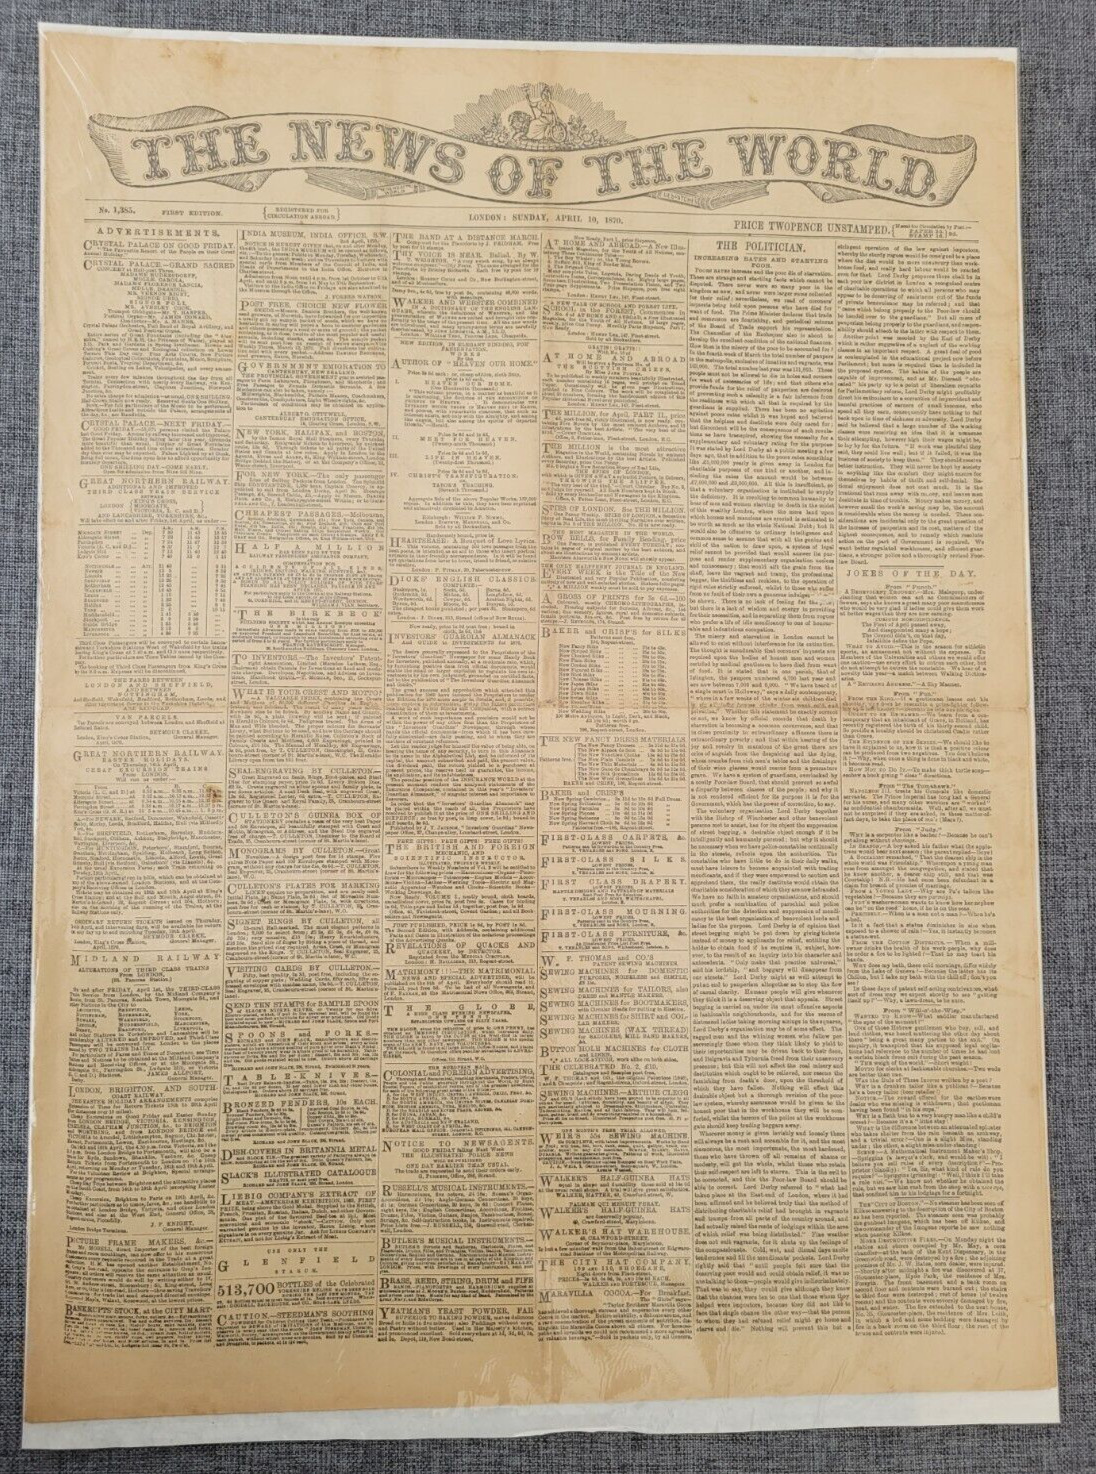 THE NEWS OF THE WORLD 10TH APRIL 1870 NEWSPAPER